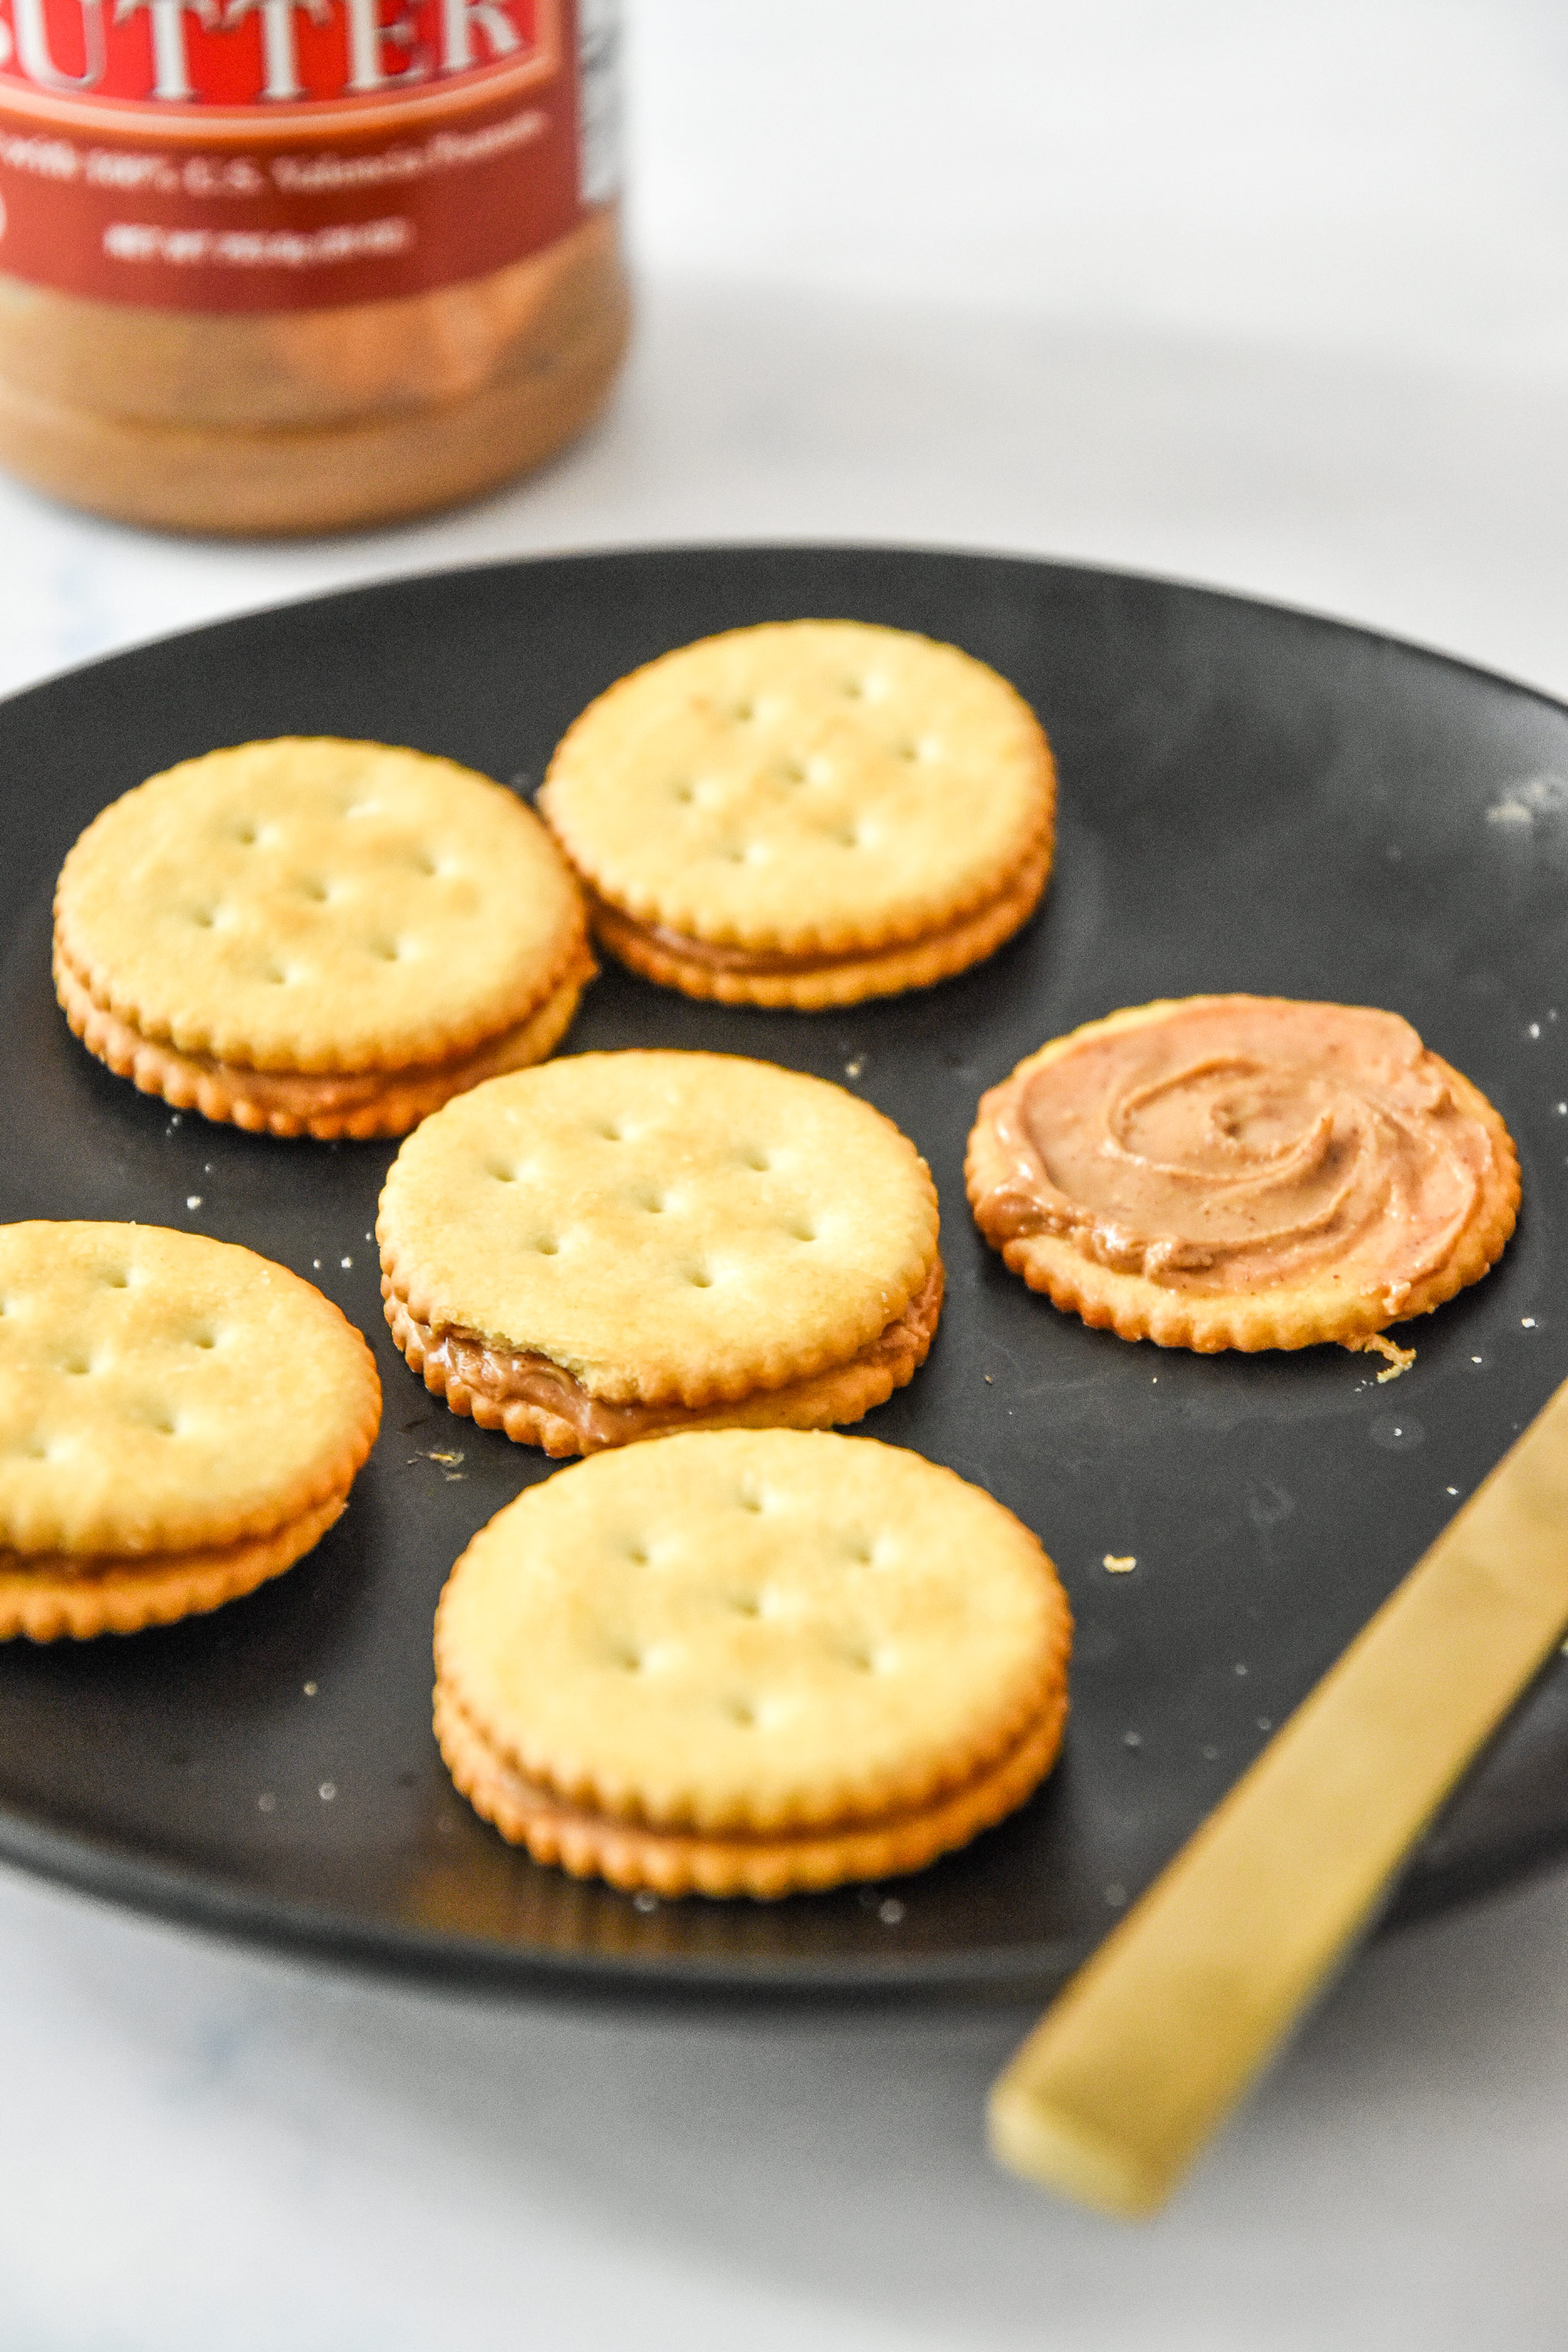 spreading peanut butter on crackers with a butter knife.